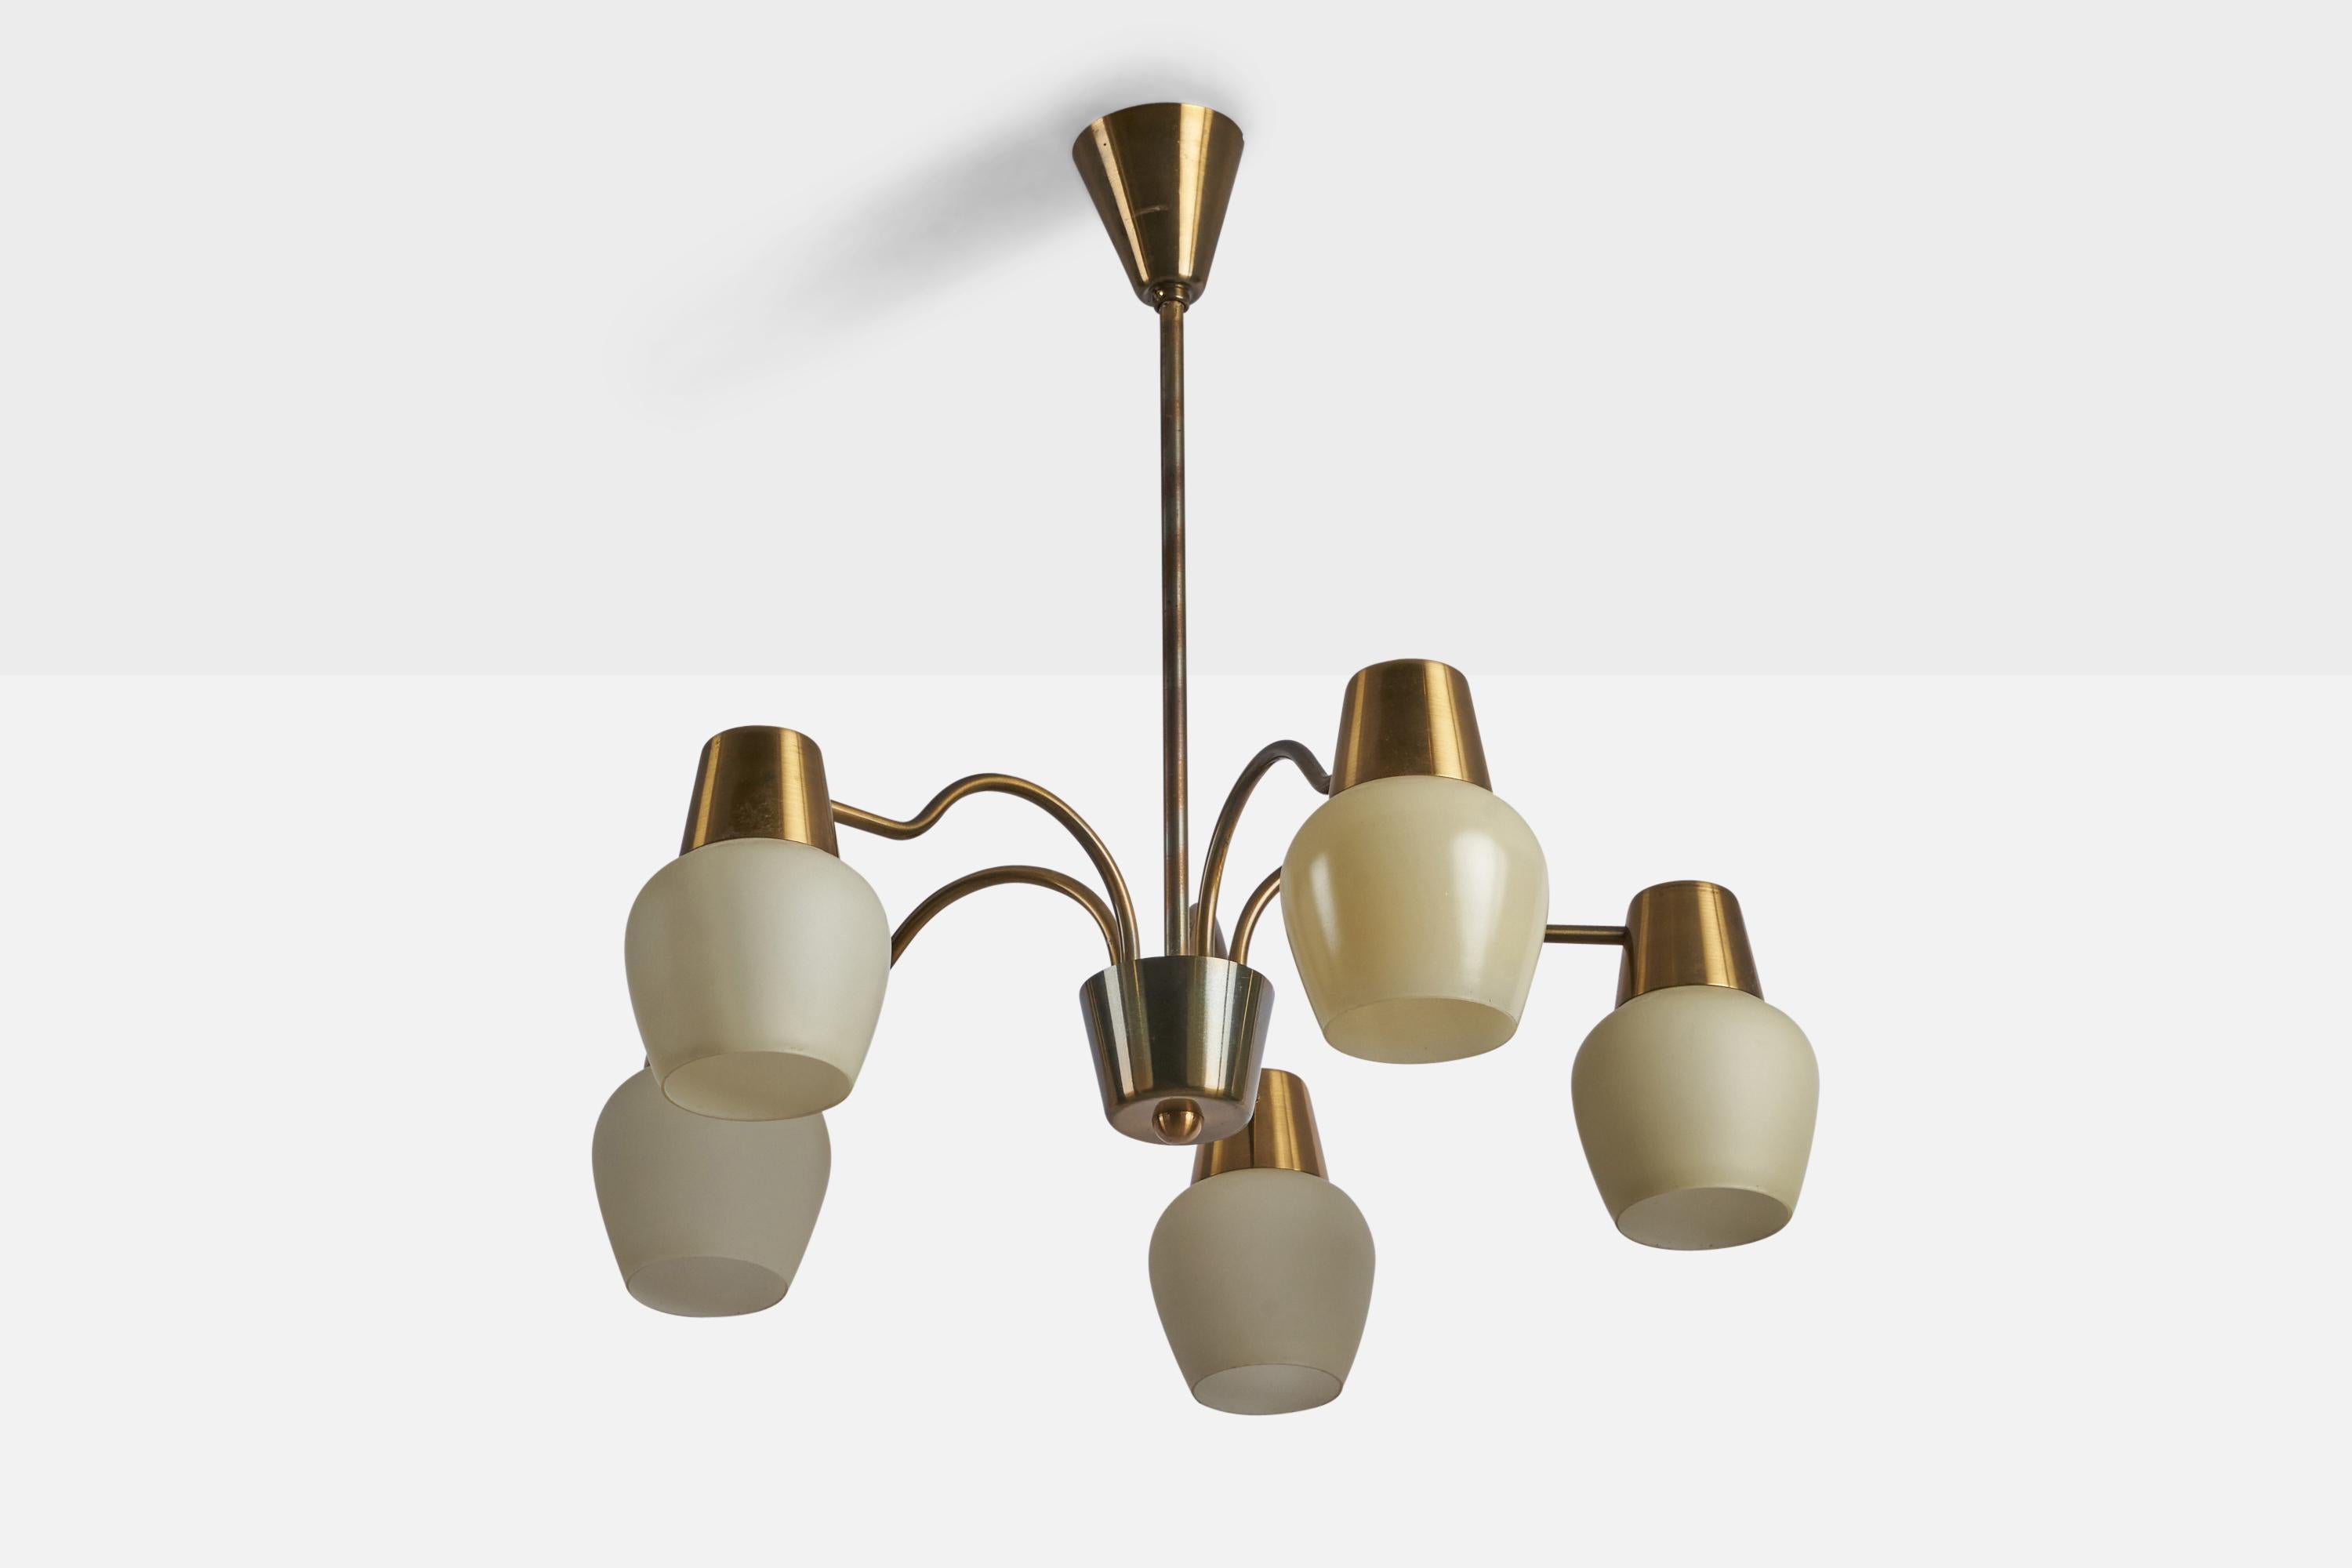 A five-armed brass, metal and opaline glass chandelier designed and produced in Denmark, c. 1960s.

Overall Dimensions (inches): 20.5” H x 23” Diameter
Bulb Specifications: E-26 Bulb
Number of Sockets: 5